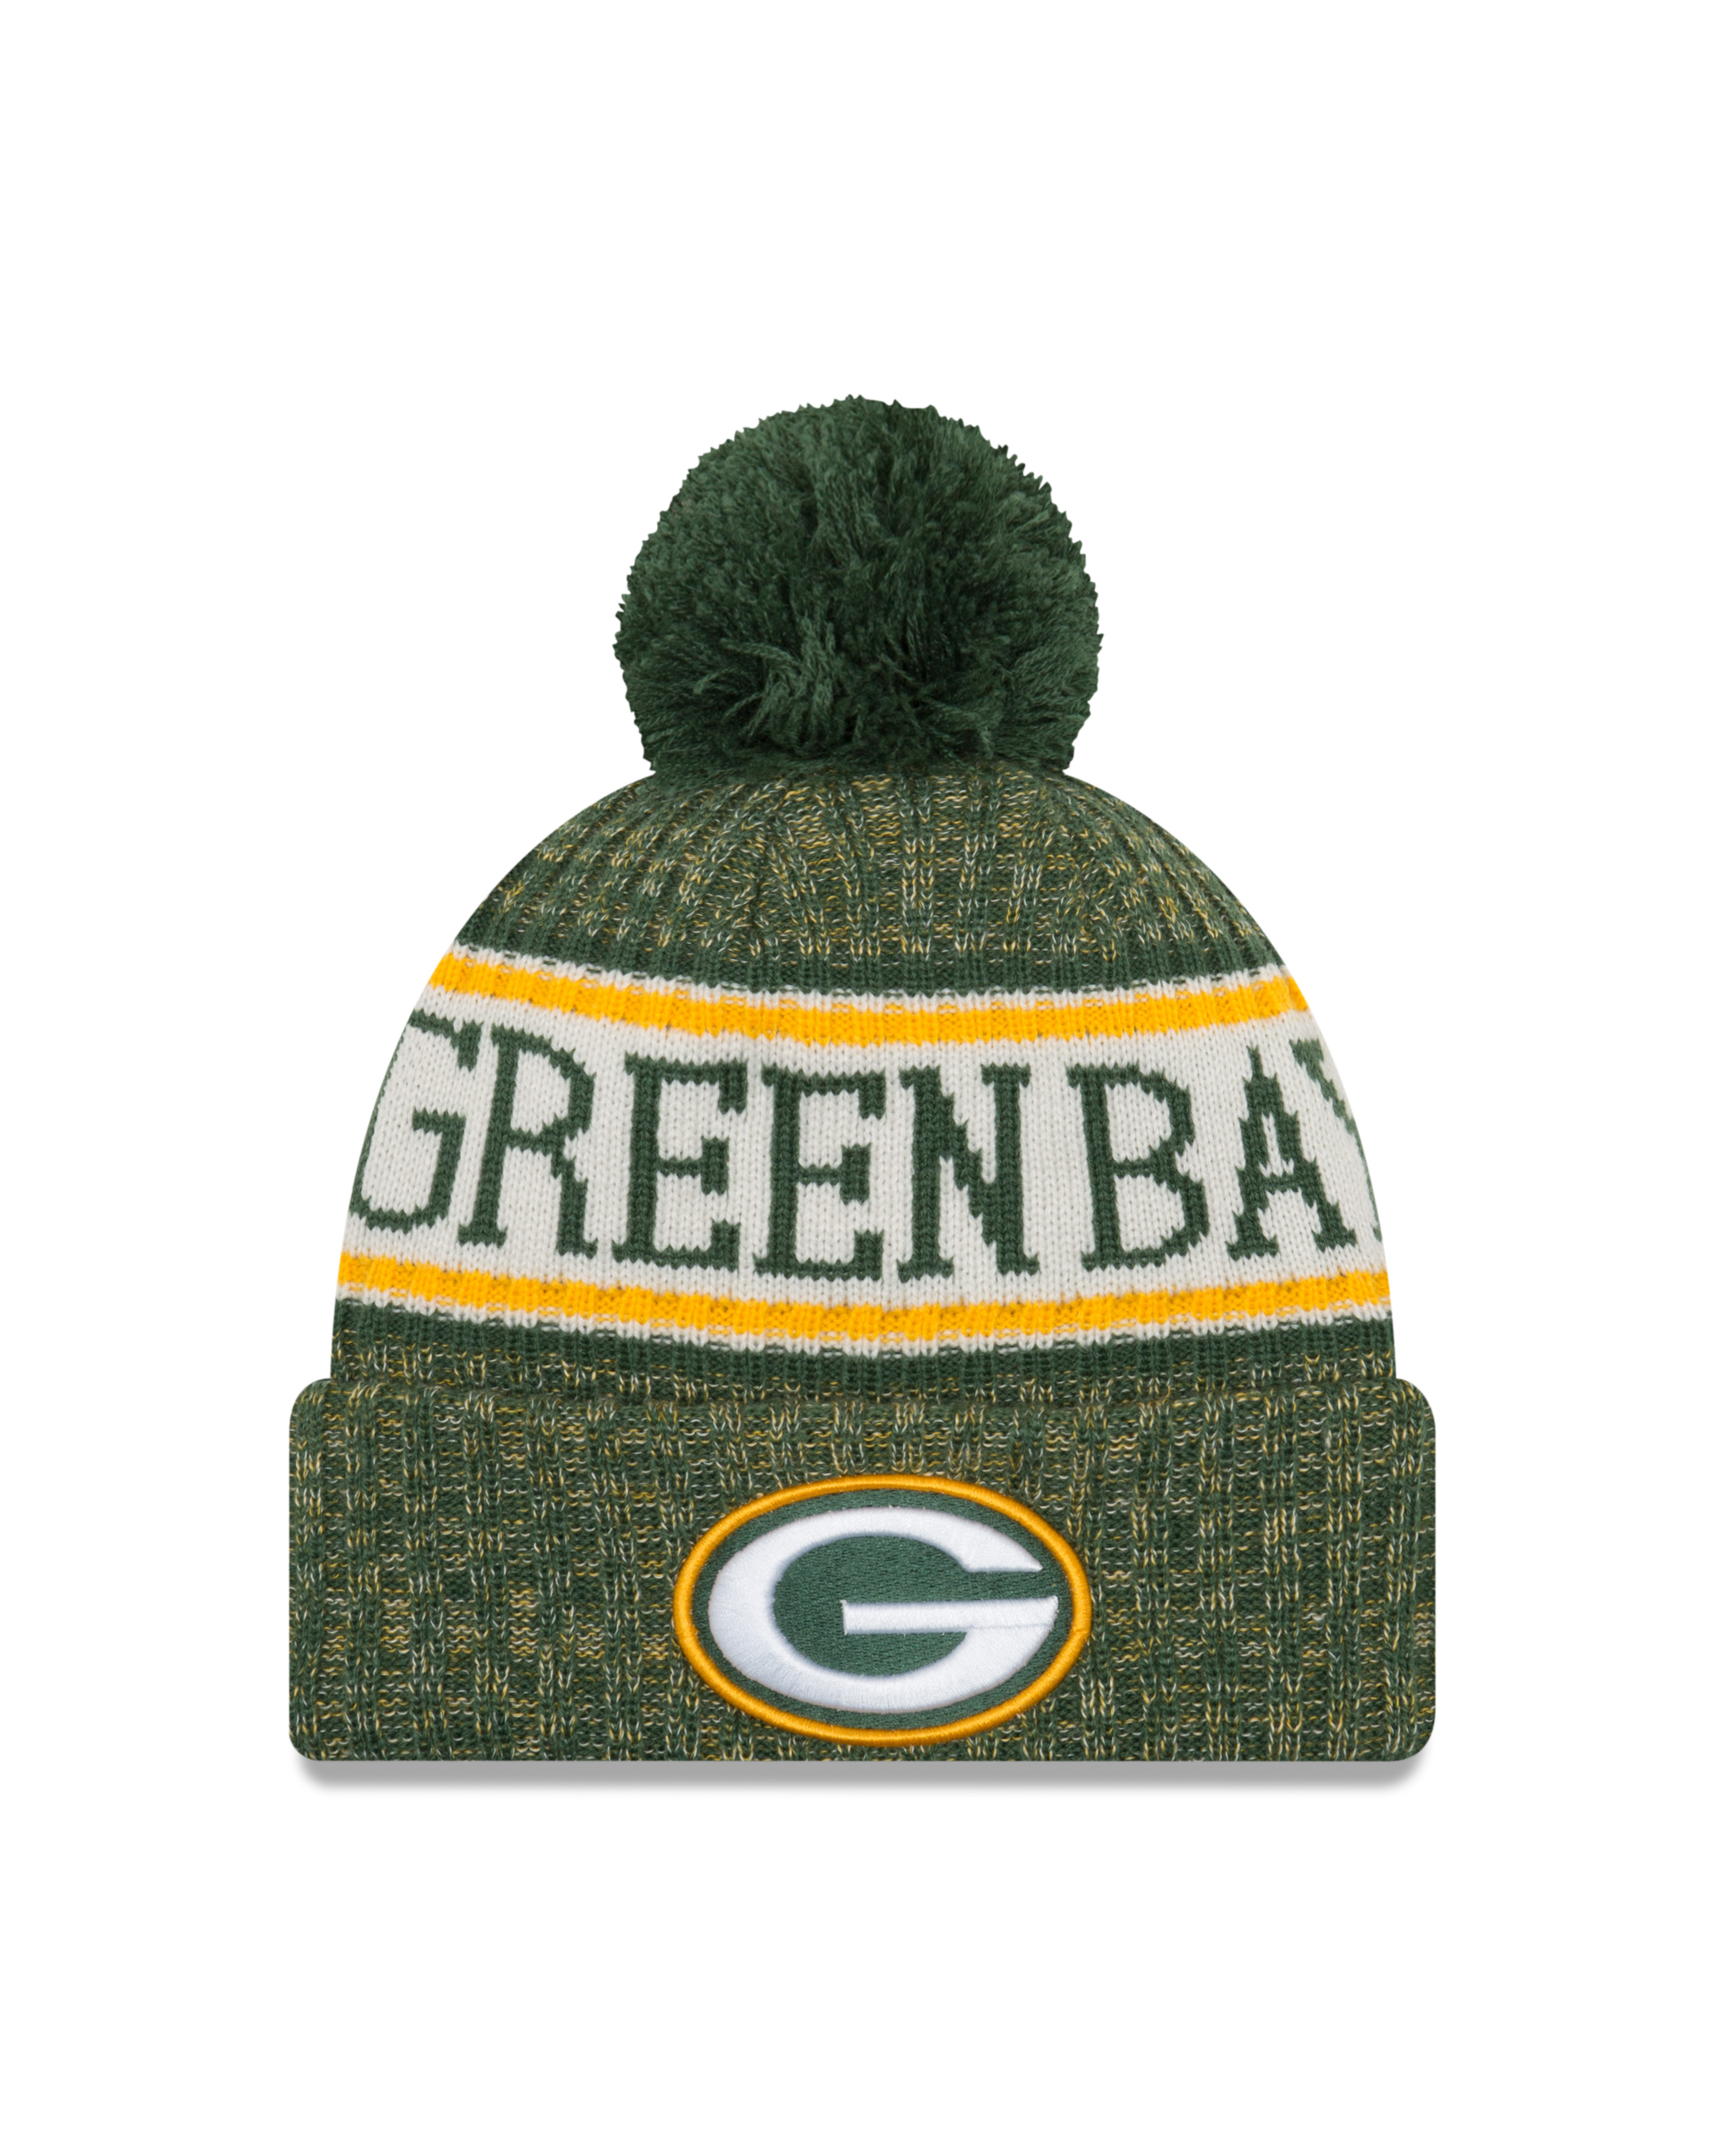 New Era Official NFL Cold Weather Collection #52